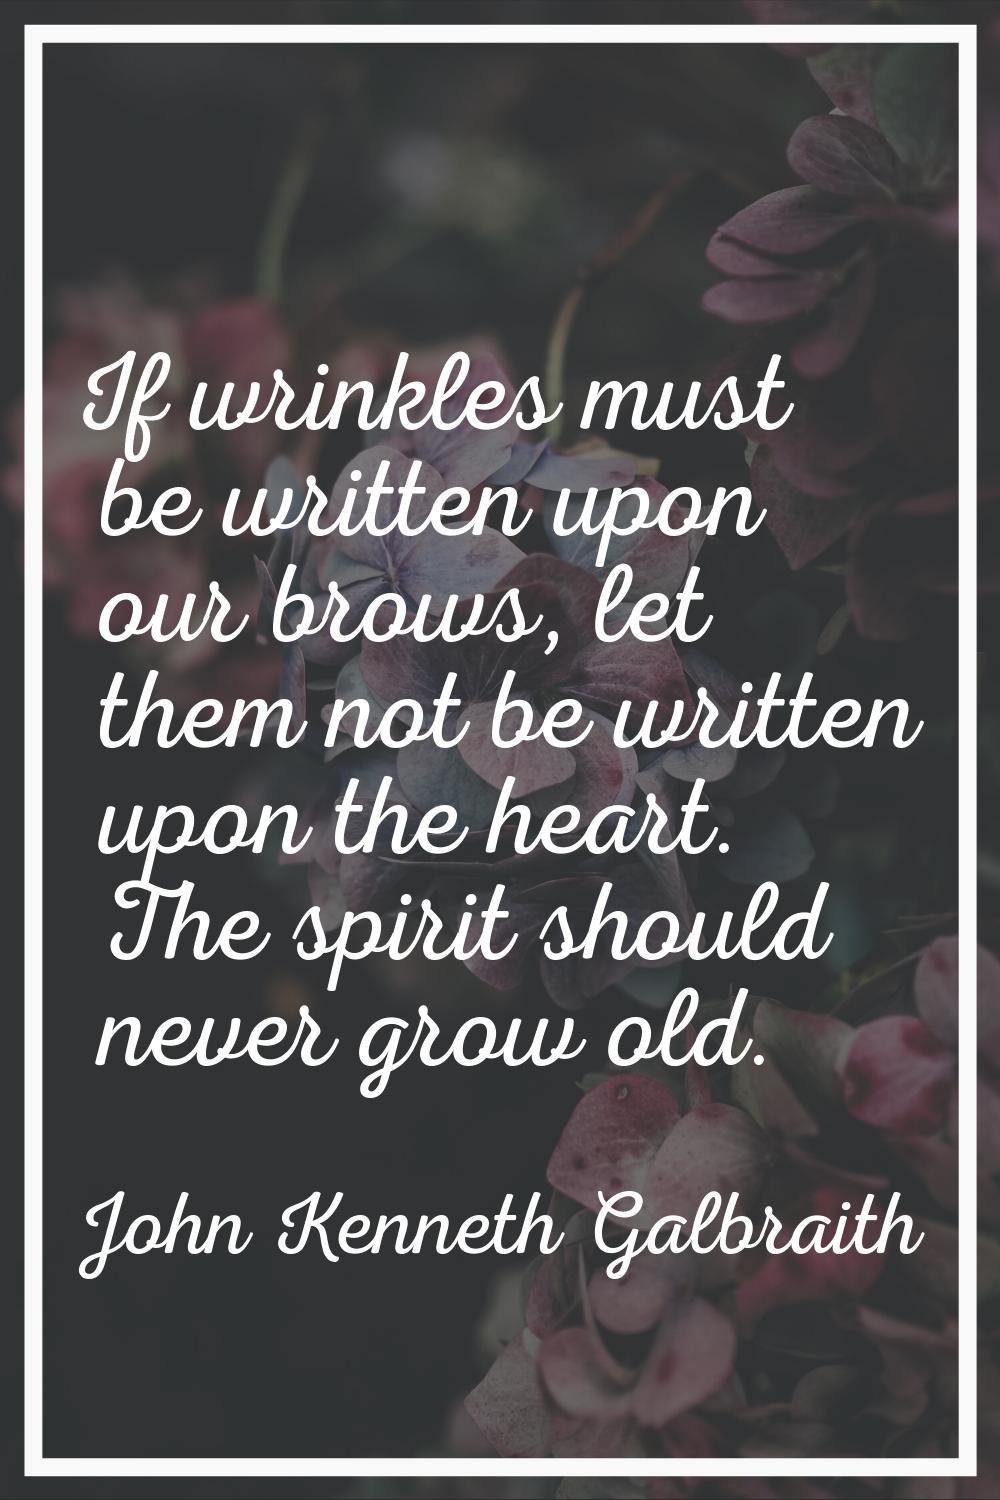 If wrinkles must be written upon our brows, let them not be written upon the heart. The spirit shou